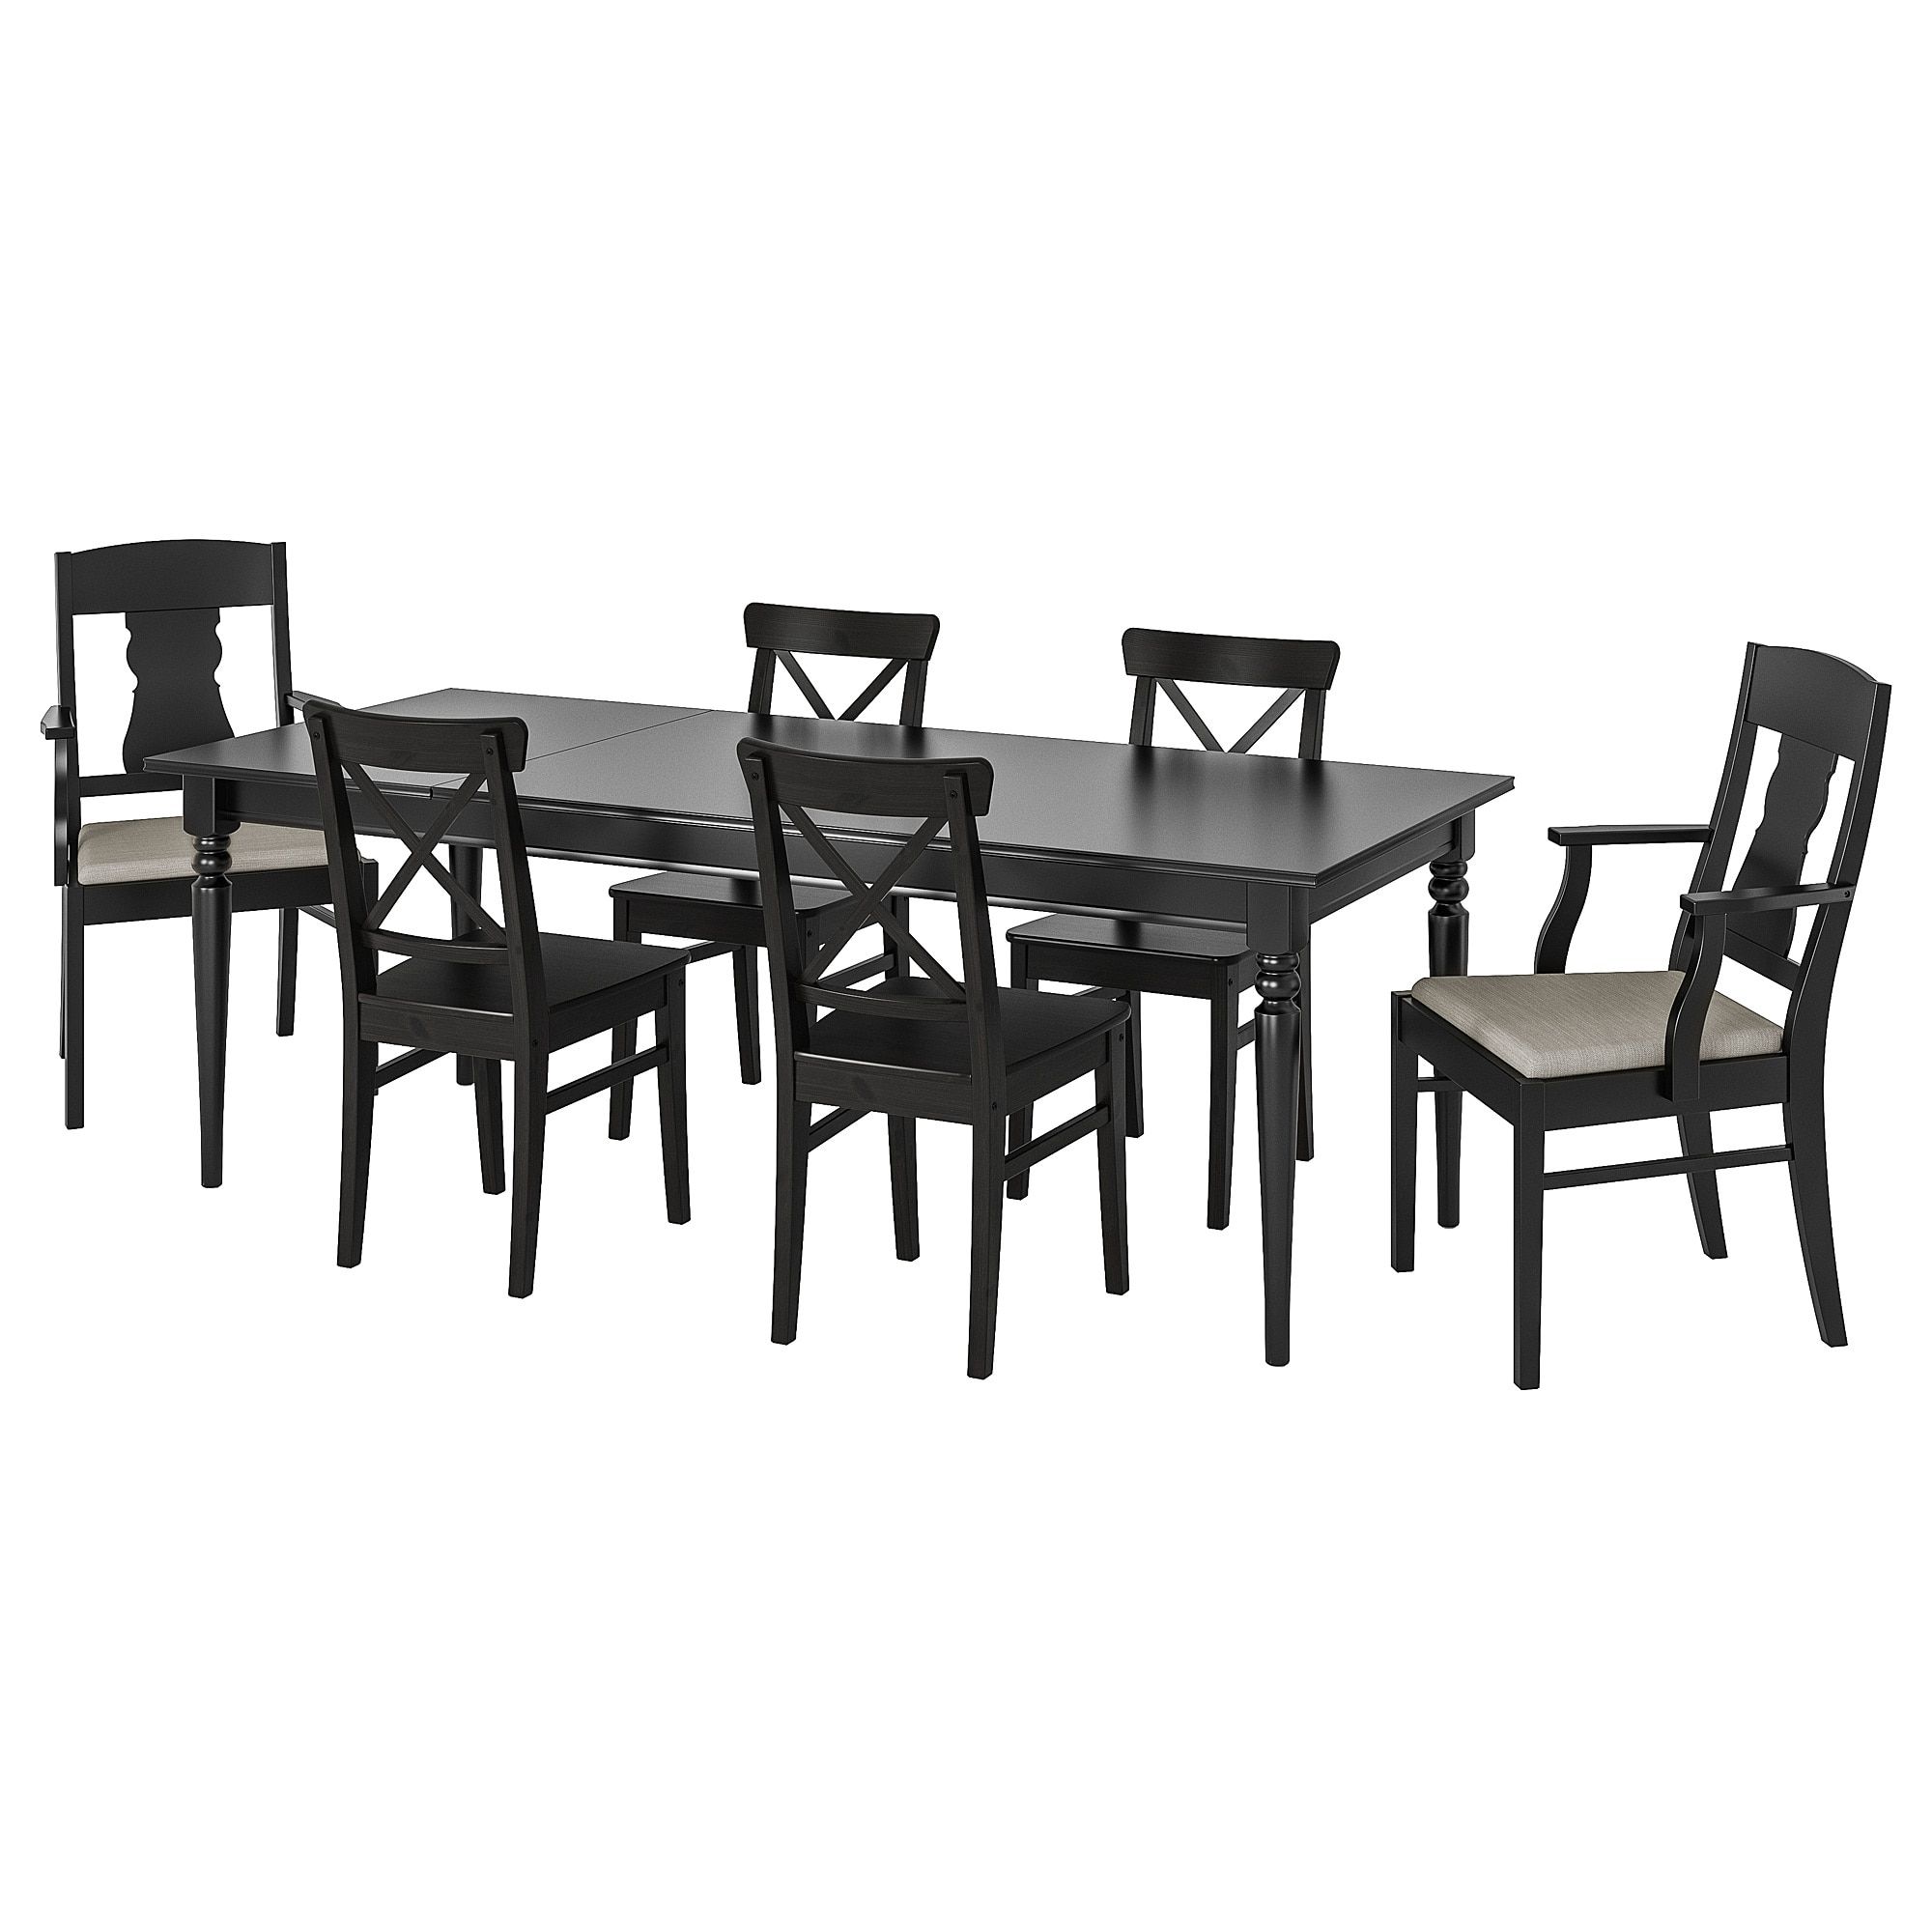 Preferred Castellanos Modern 5 Piece Counter Height Dining Sets Pertaining To Ingatorp / Ingolf Table And 6 Chairs – Black, Nolhaga Grey/beige – Ikea (View 16 of 20)